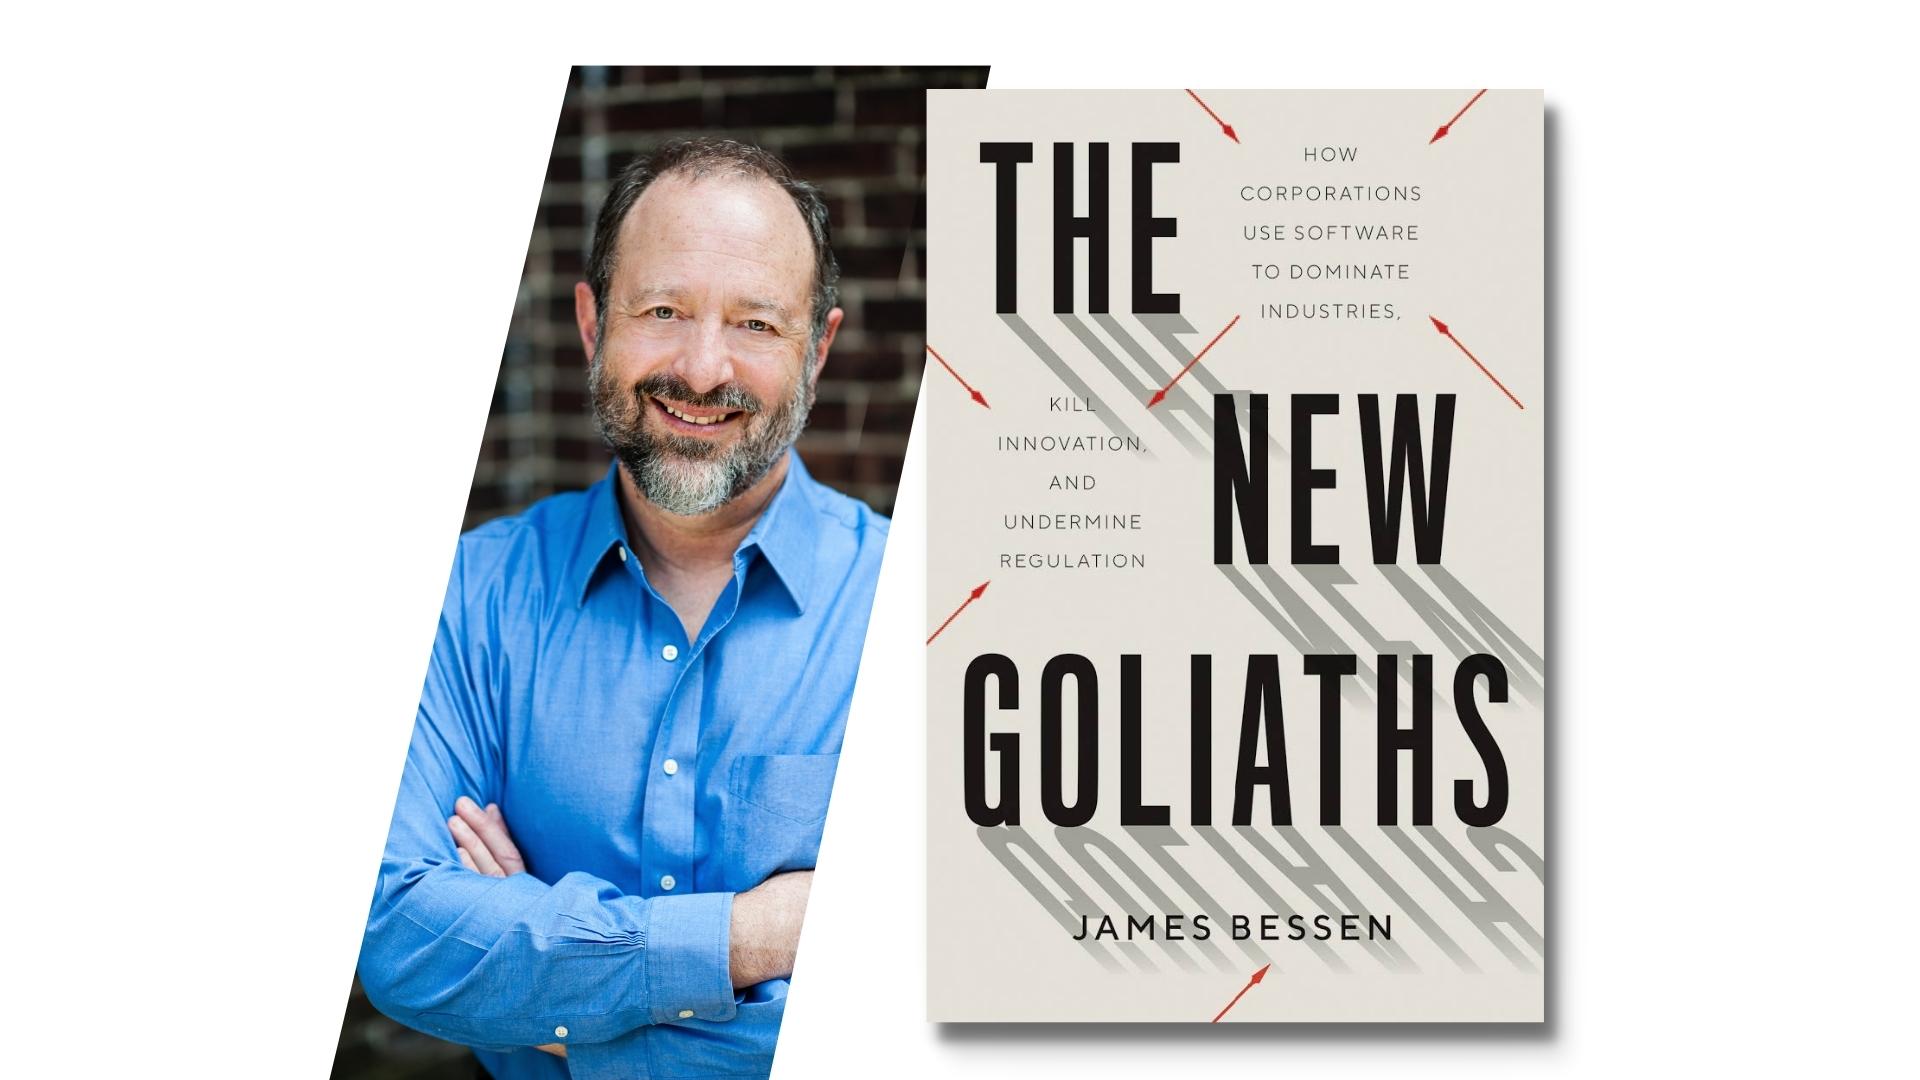 James Bessen arranged alongside the cover of his book, "The New Goliaths"